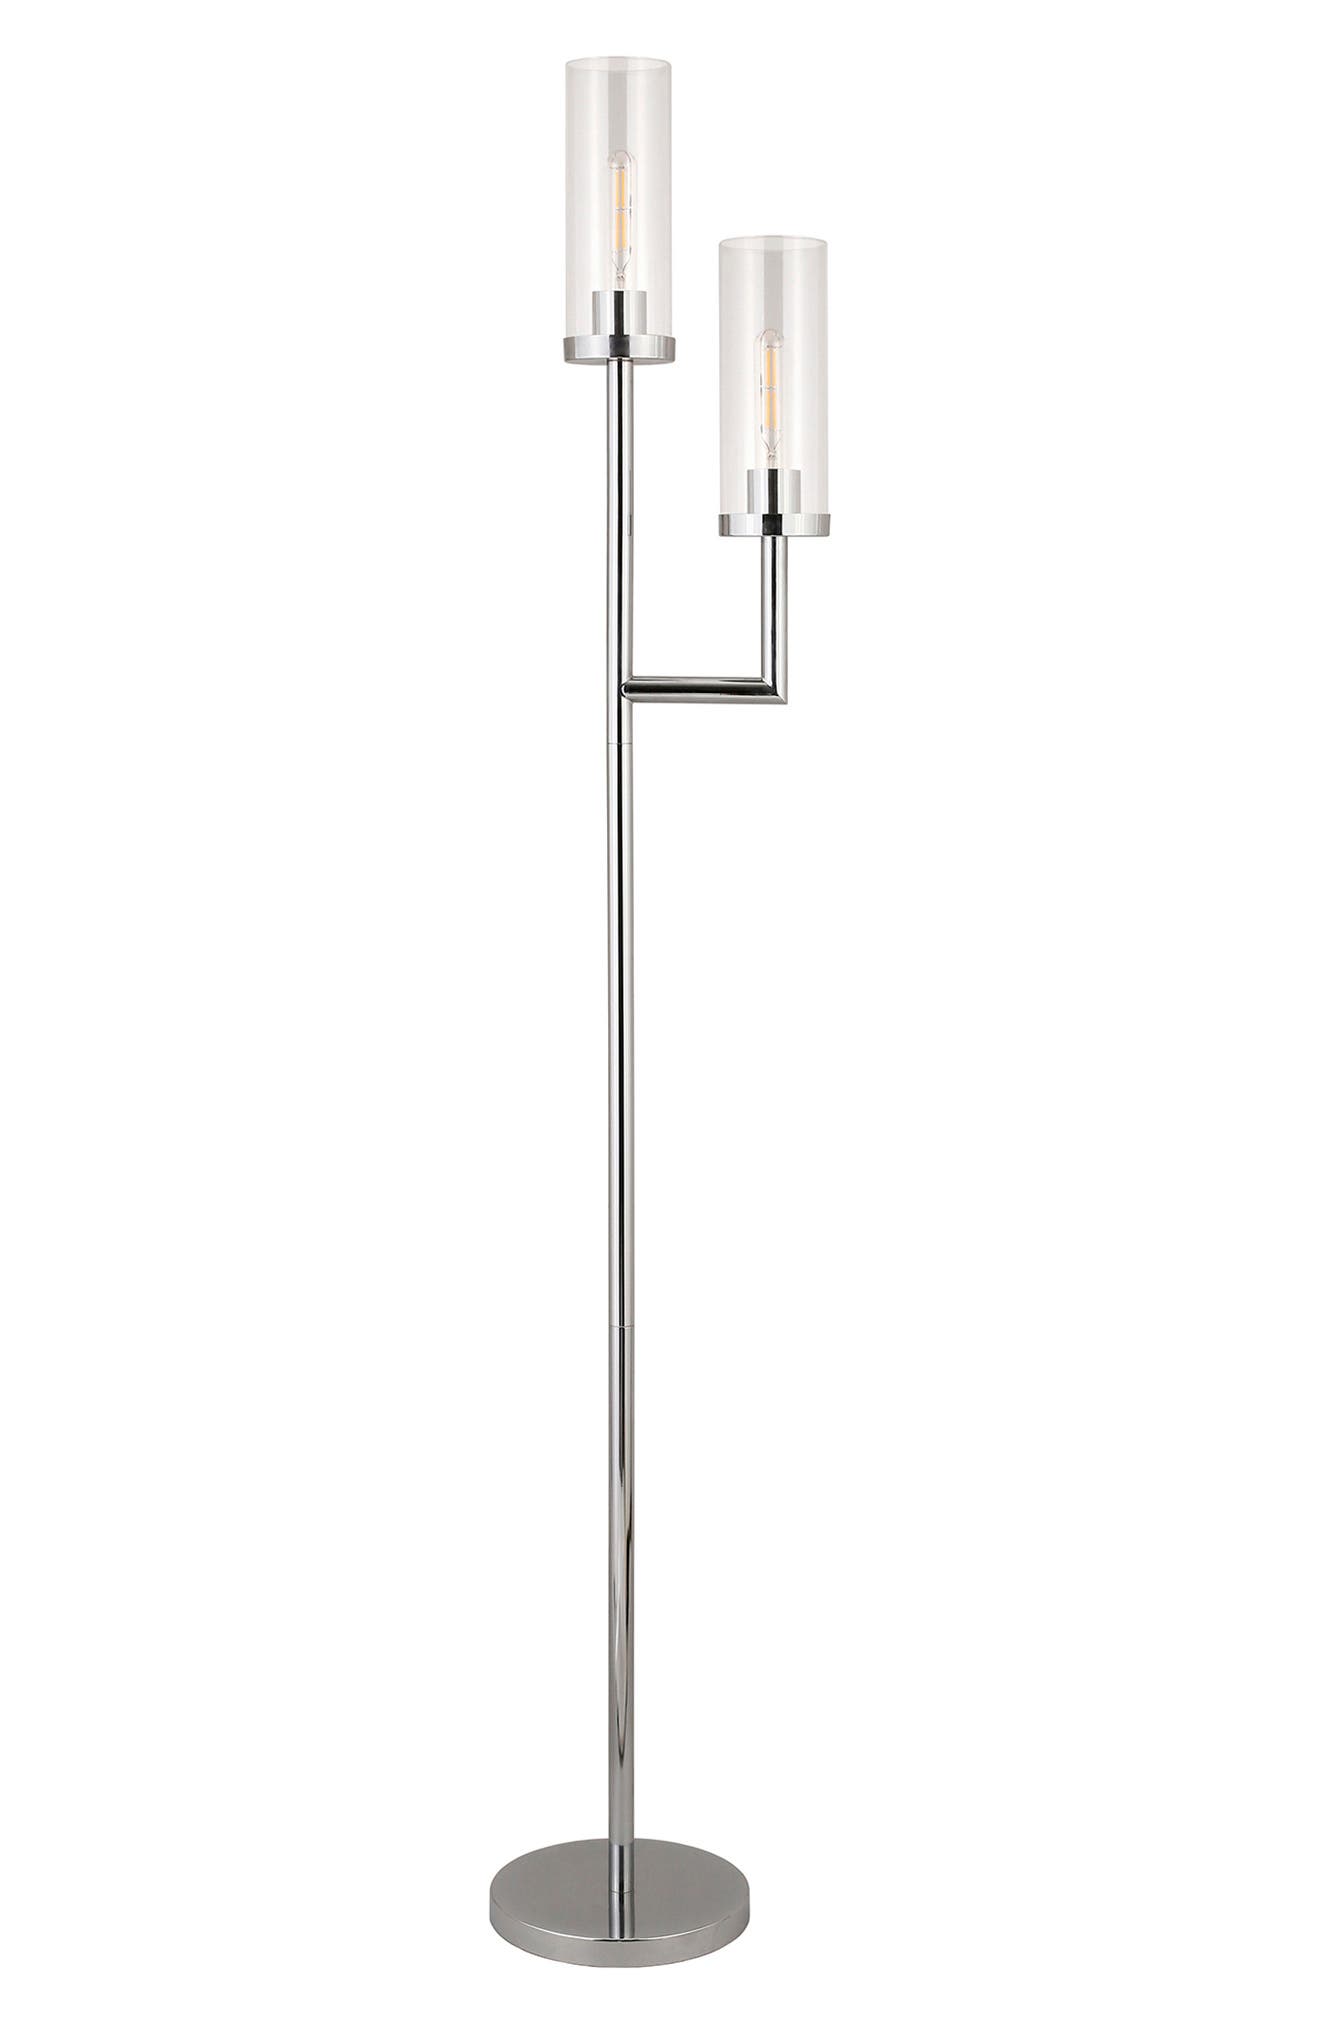 HUDSON & CANAL BASSO POLISHED NICKEL 2-LIGHT TORCHIERE FLOOR LAMP WITH CLEAR GLASS SHADES,810325034358